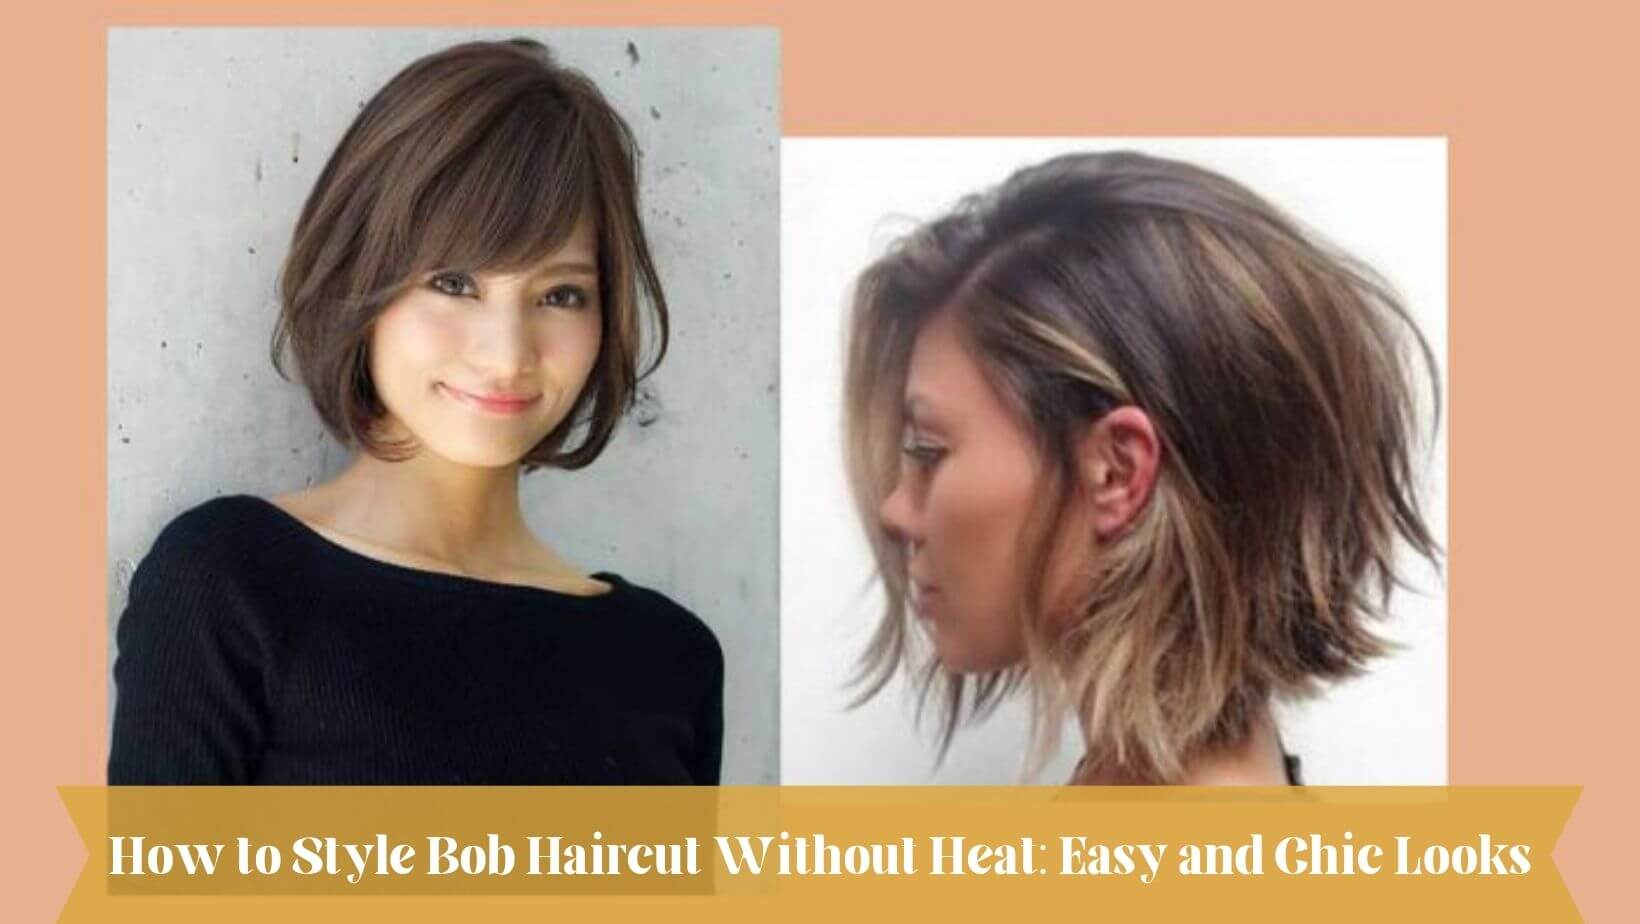 How to Style Bob Haircut Without Heat